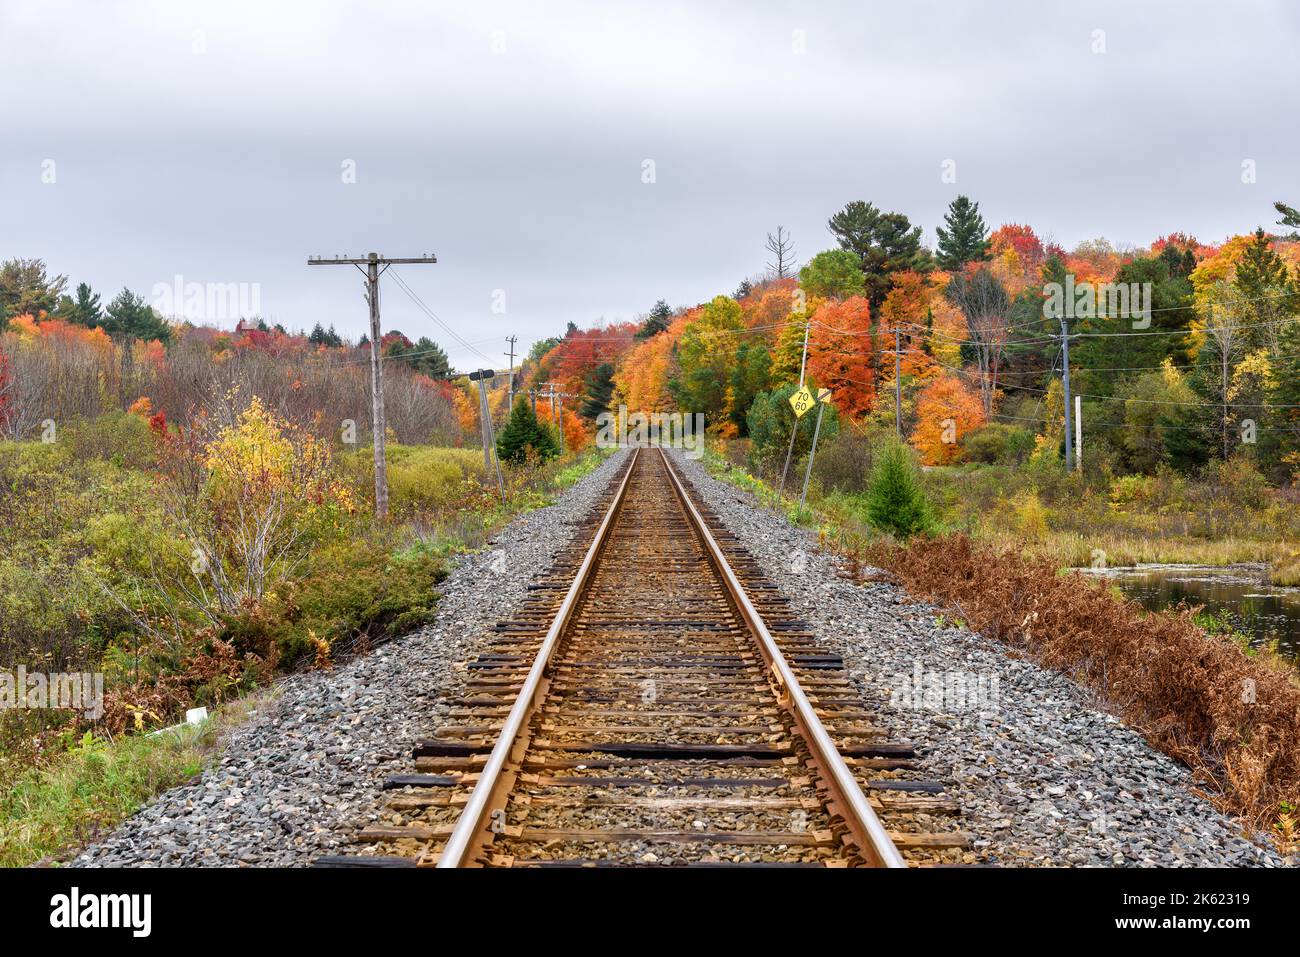 Railway track running through a a forested landscape at the peak of autumn colours on a cloudy day Stock Photo